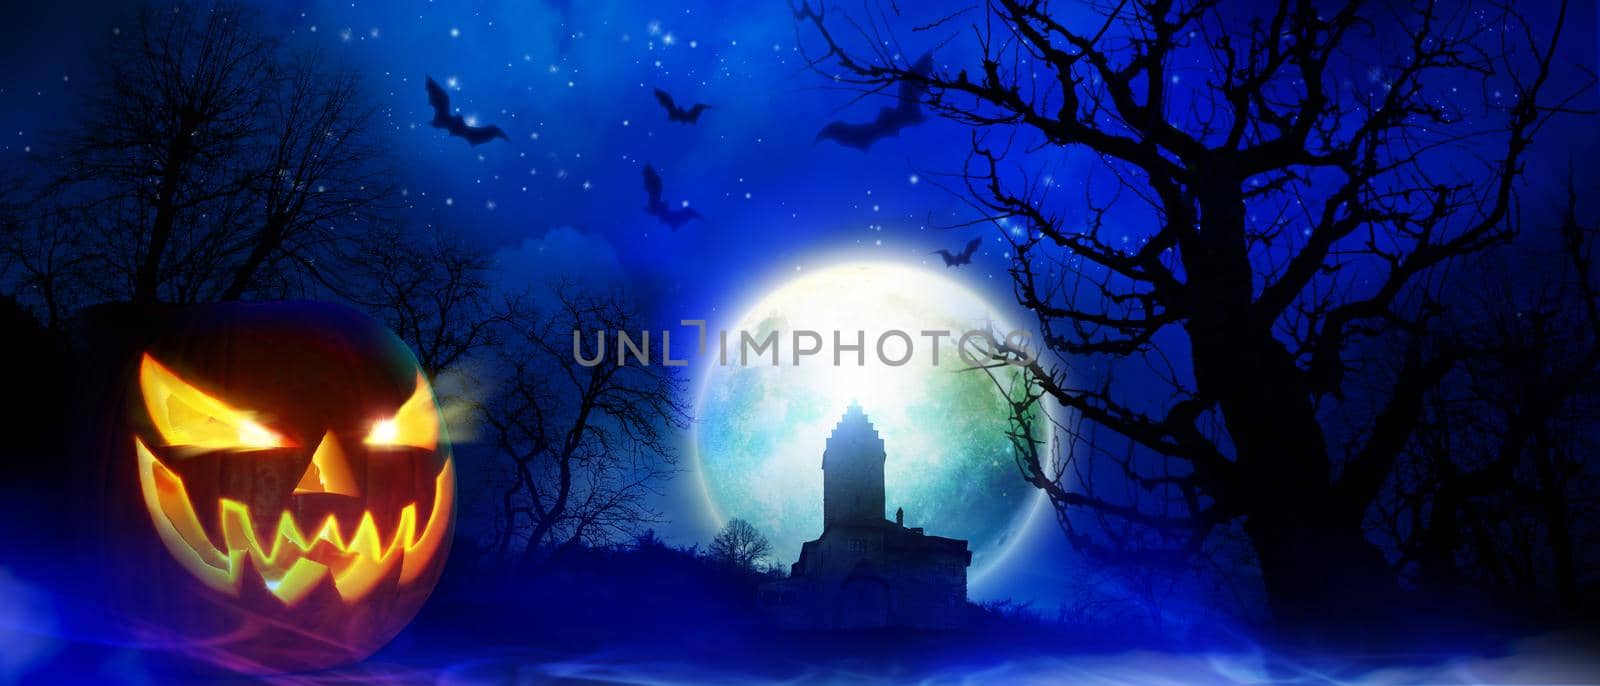 Halloween background with graveyard in a spooky night.